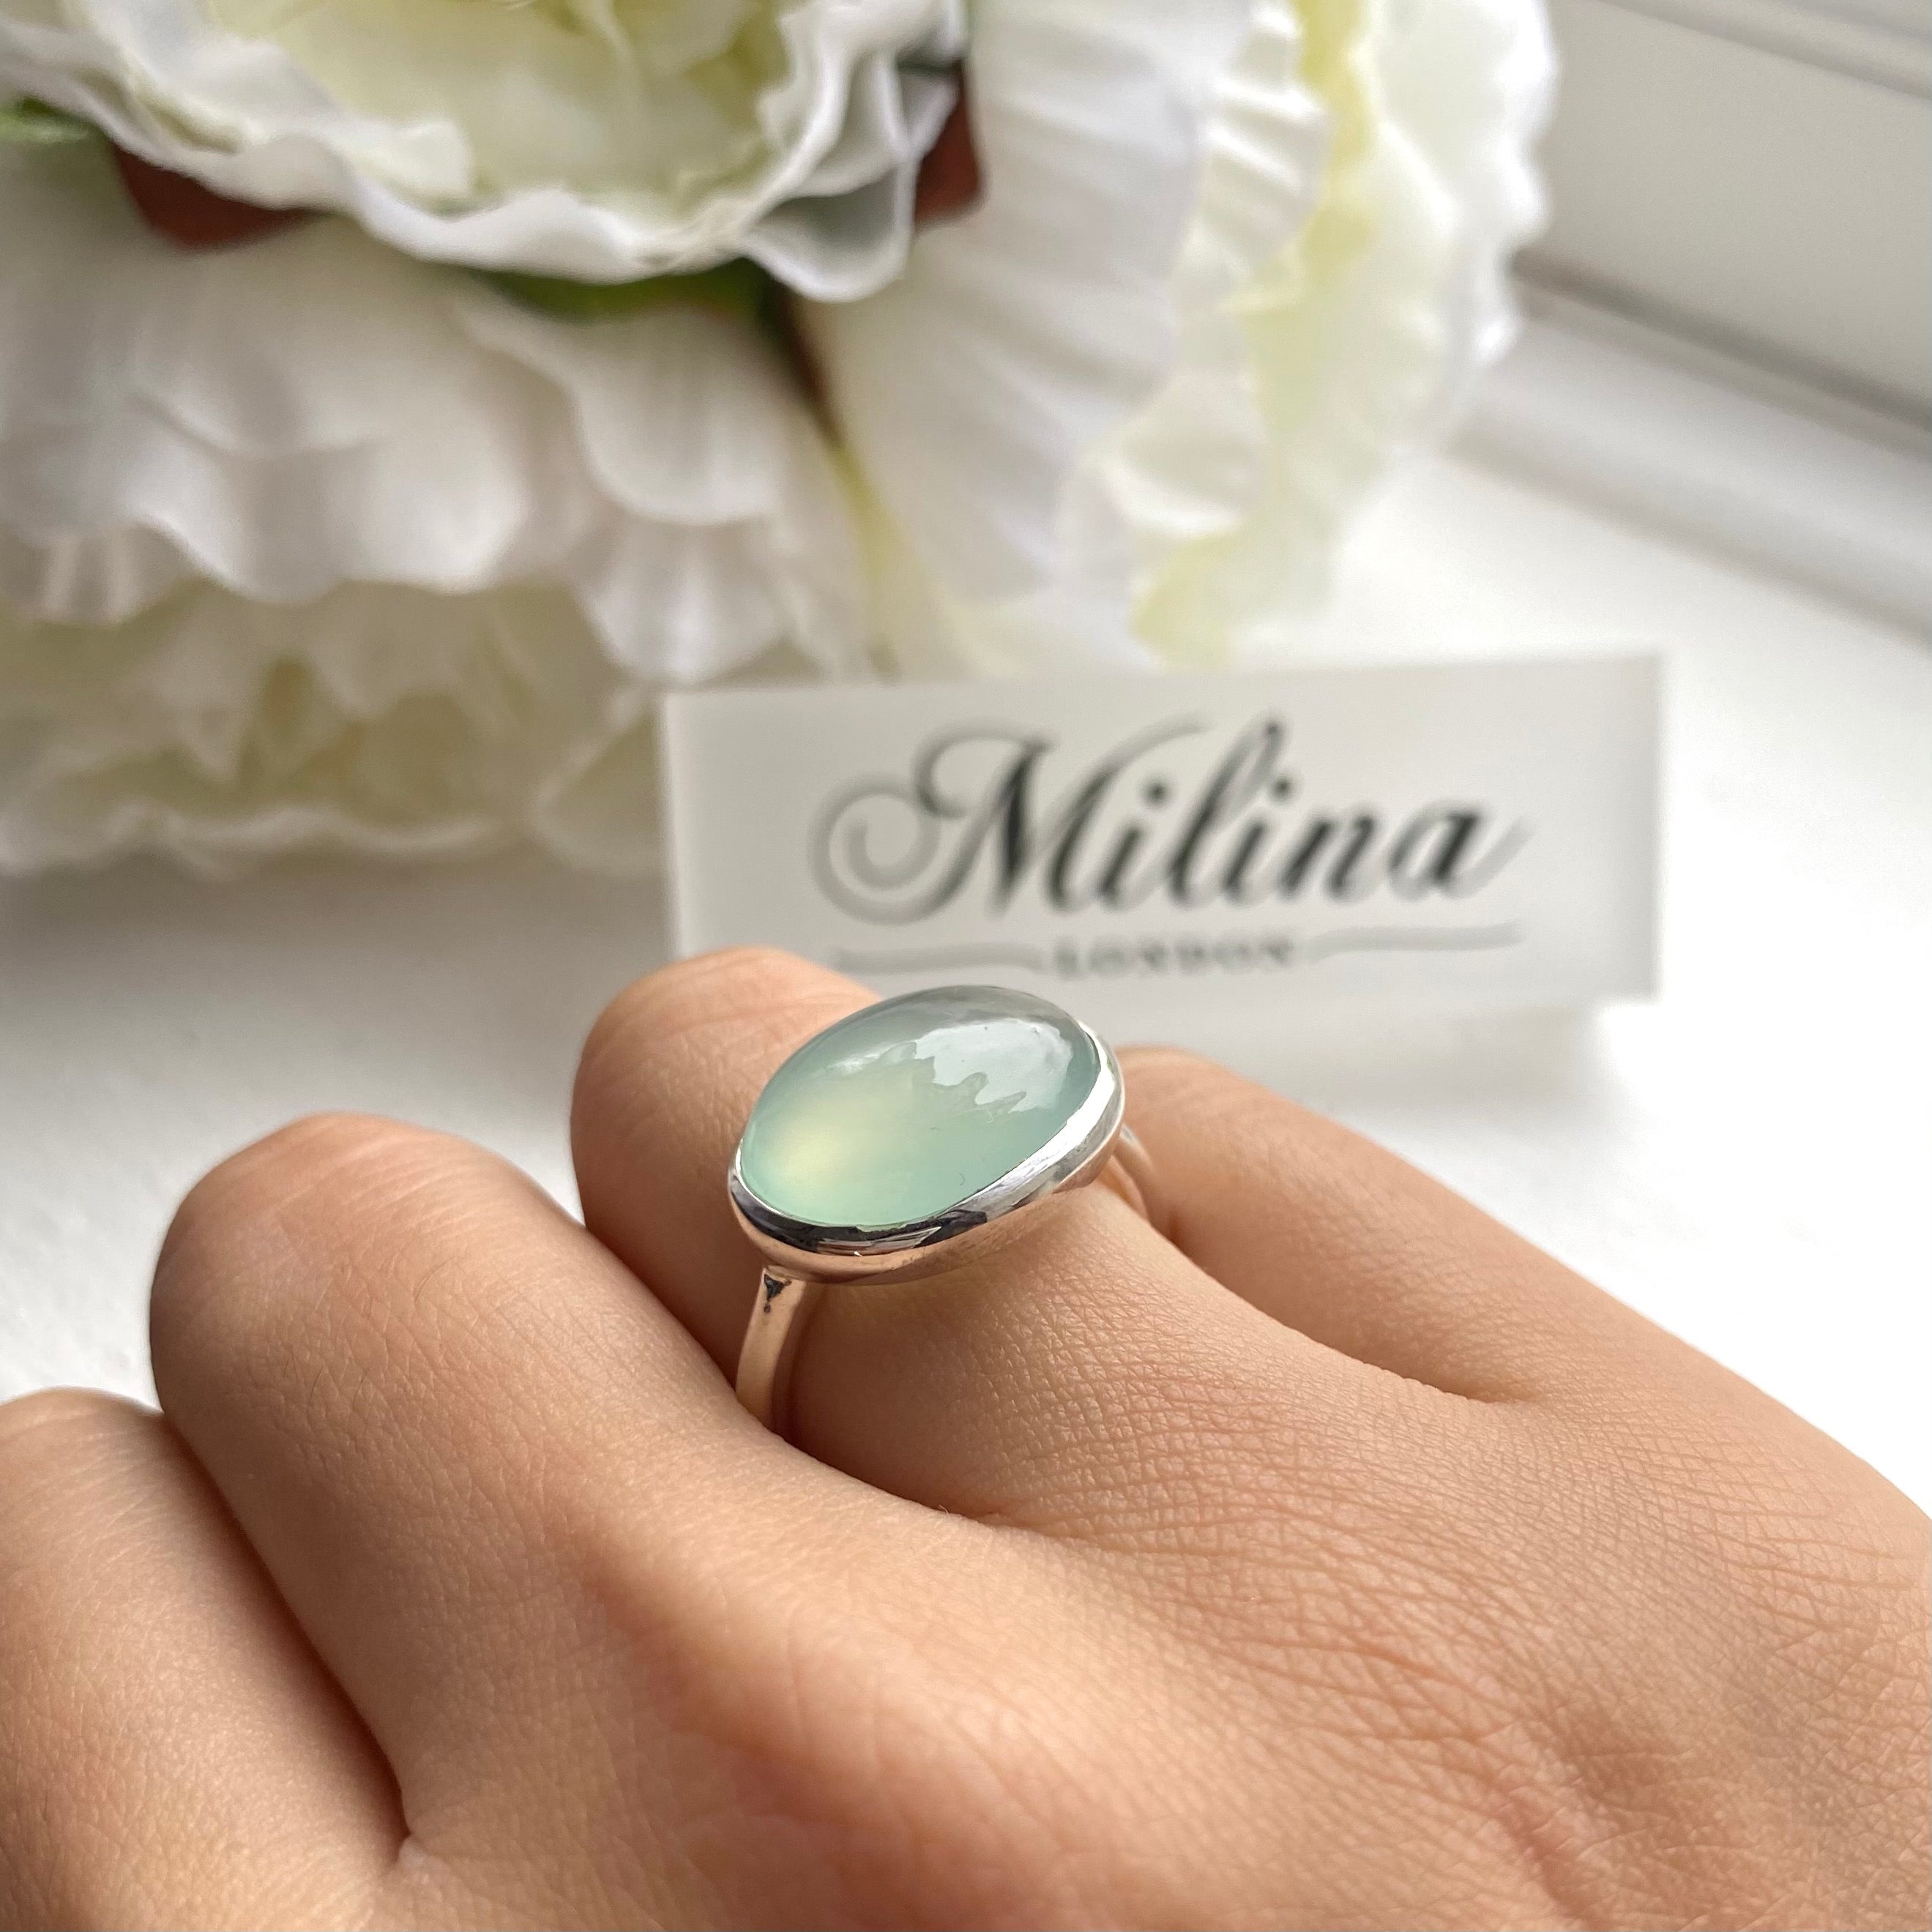 Cabochon Oval Cut Natural Gemstone Sterling Silver Ring - Aqua Chalcedony